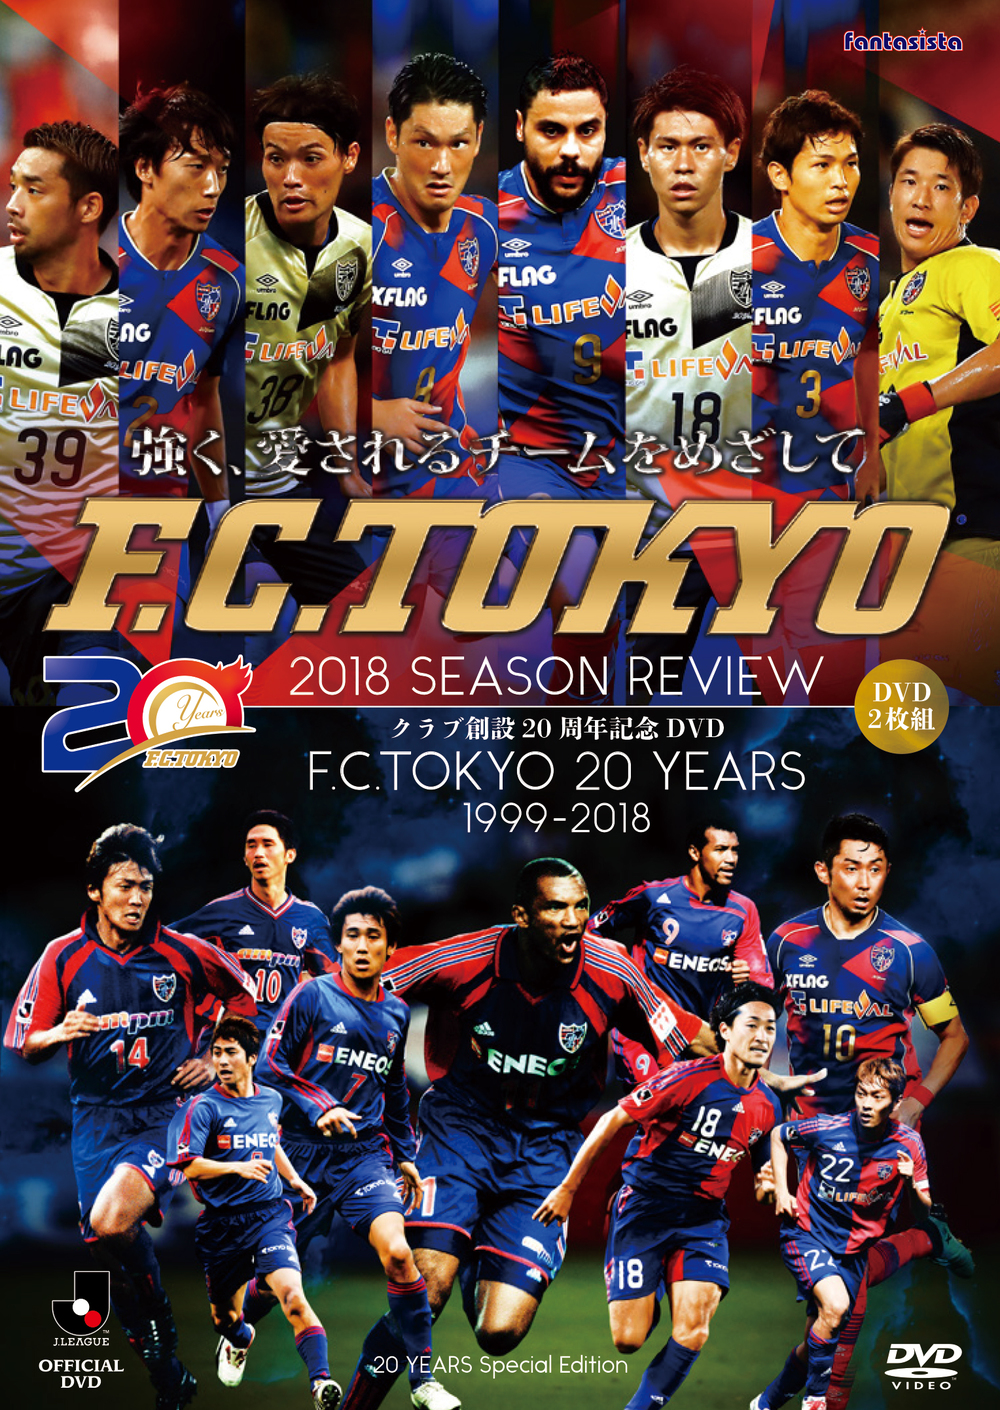 FC東京2018SEASON REVIEW 20 YEARS Special Edition』Blu-ray/DVD